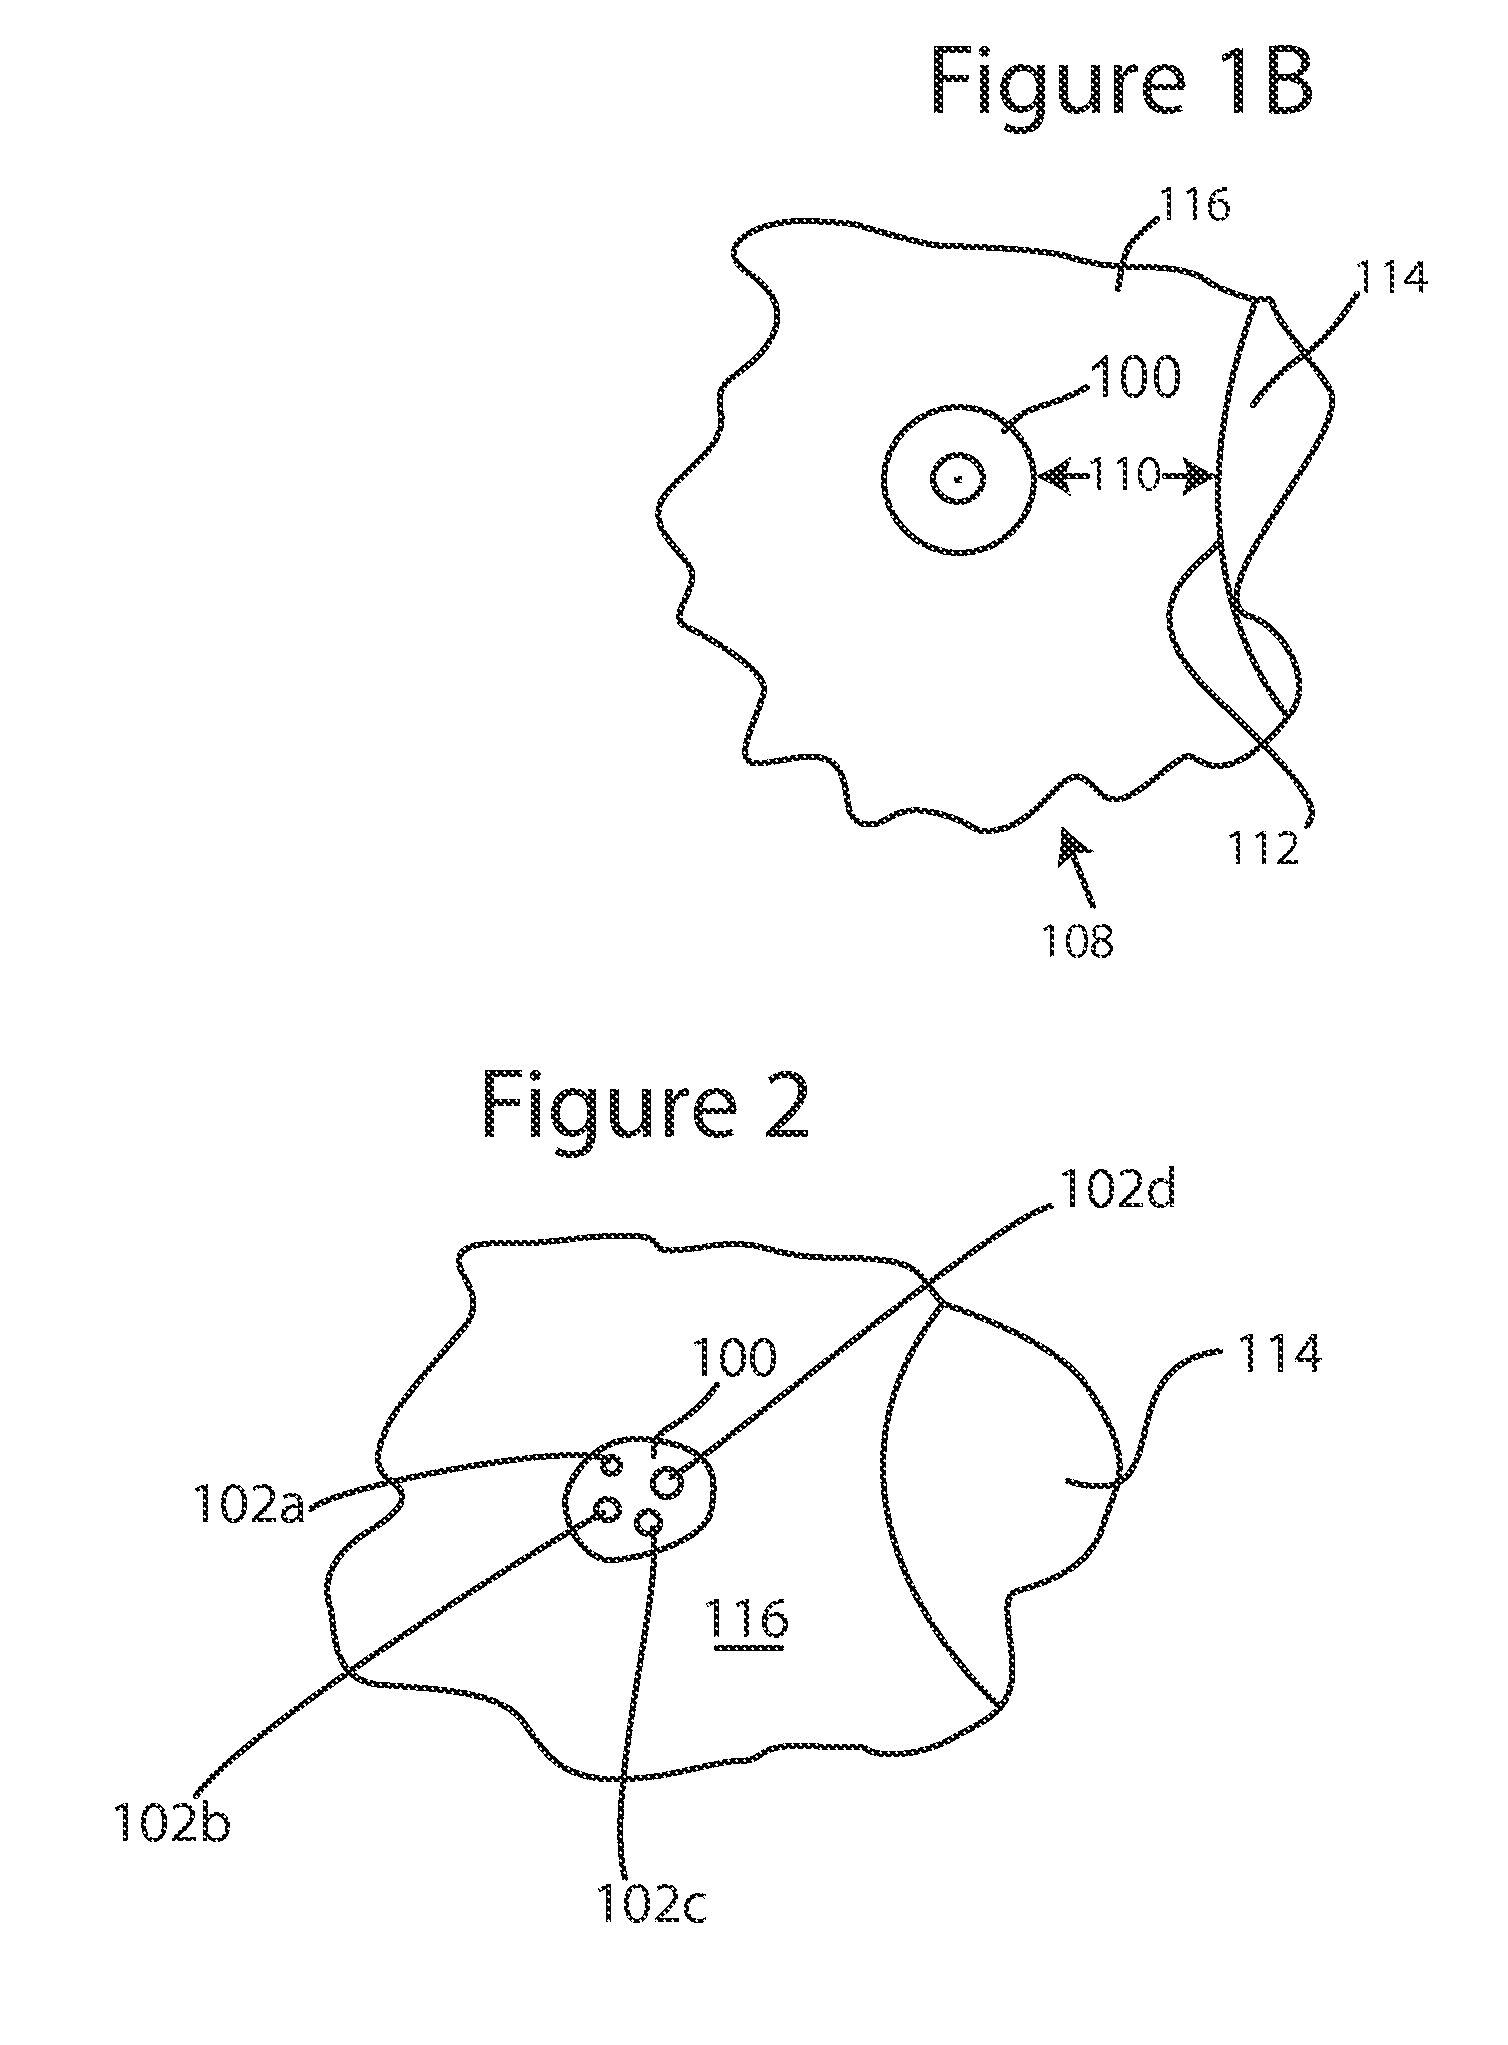 Glaucoma drainage device and uses thereof